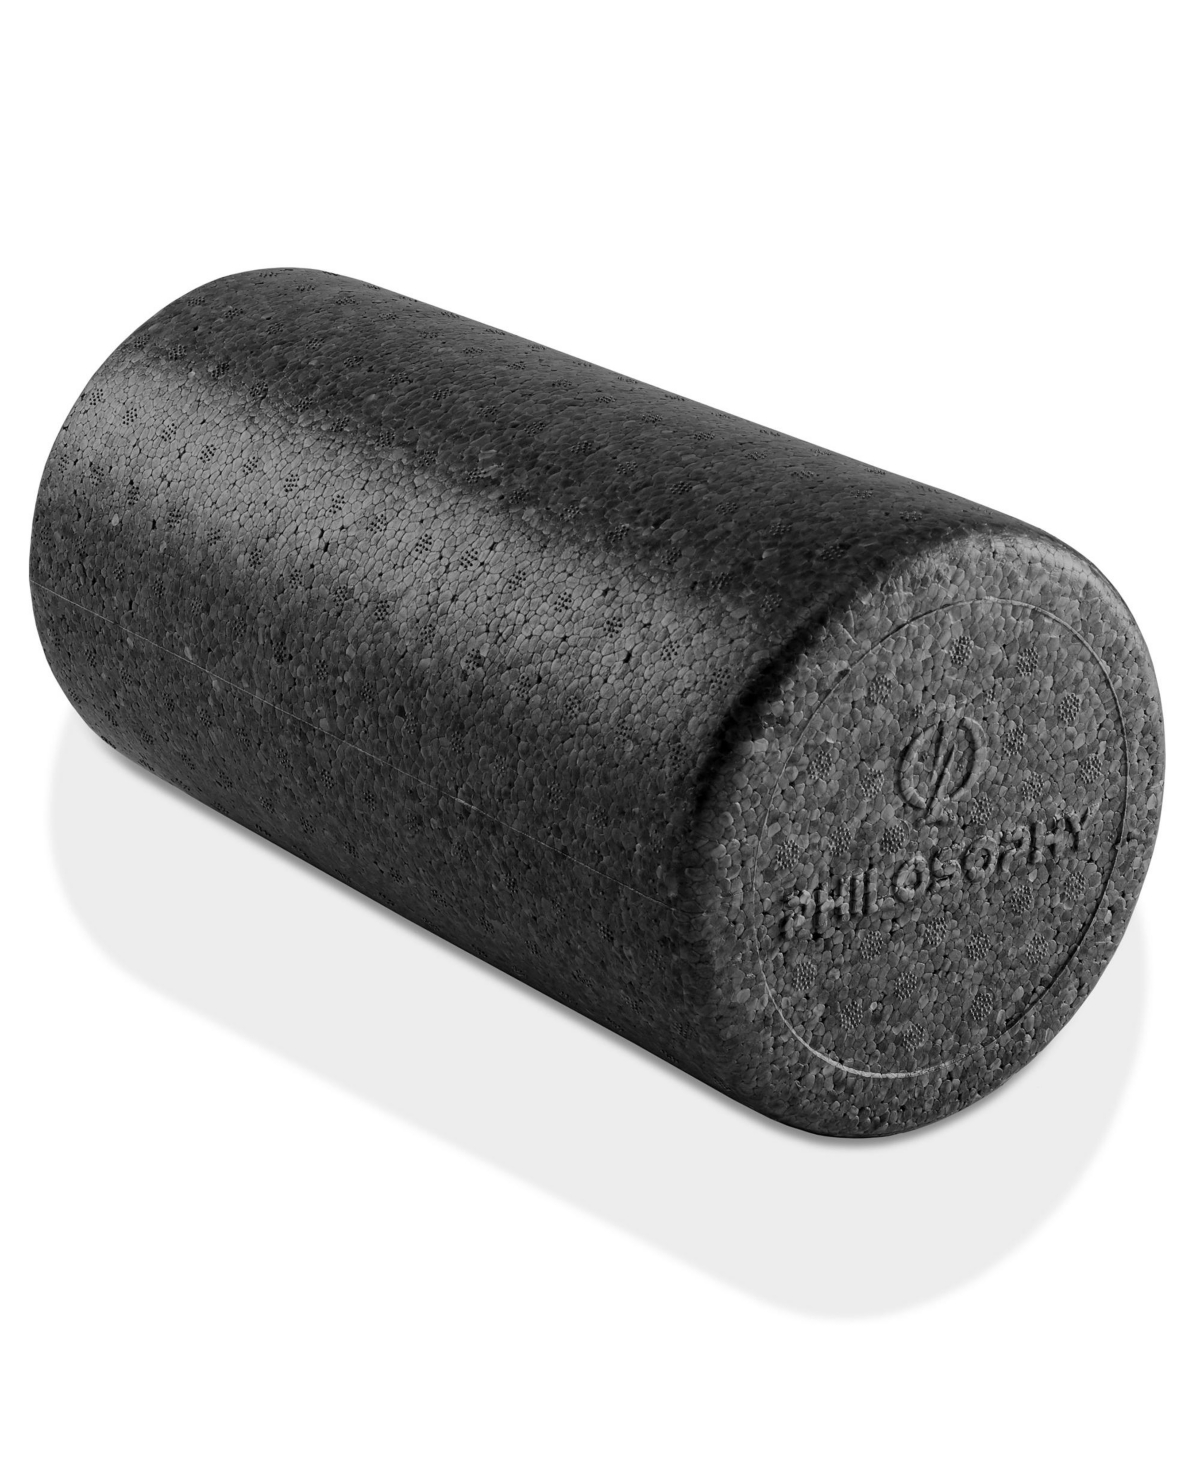 12" High-Density Foam Roller for Exercise, Massage, Muscle Recovery - Round, Black - Black